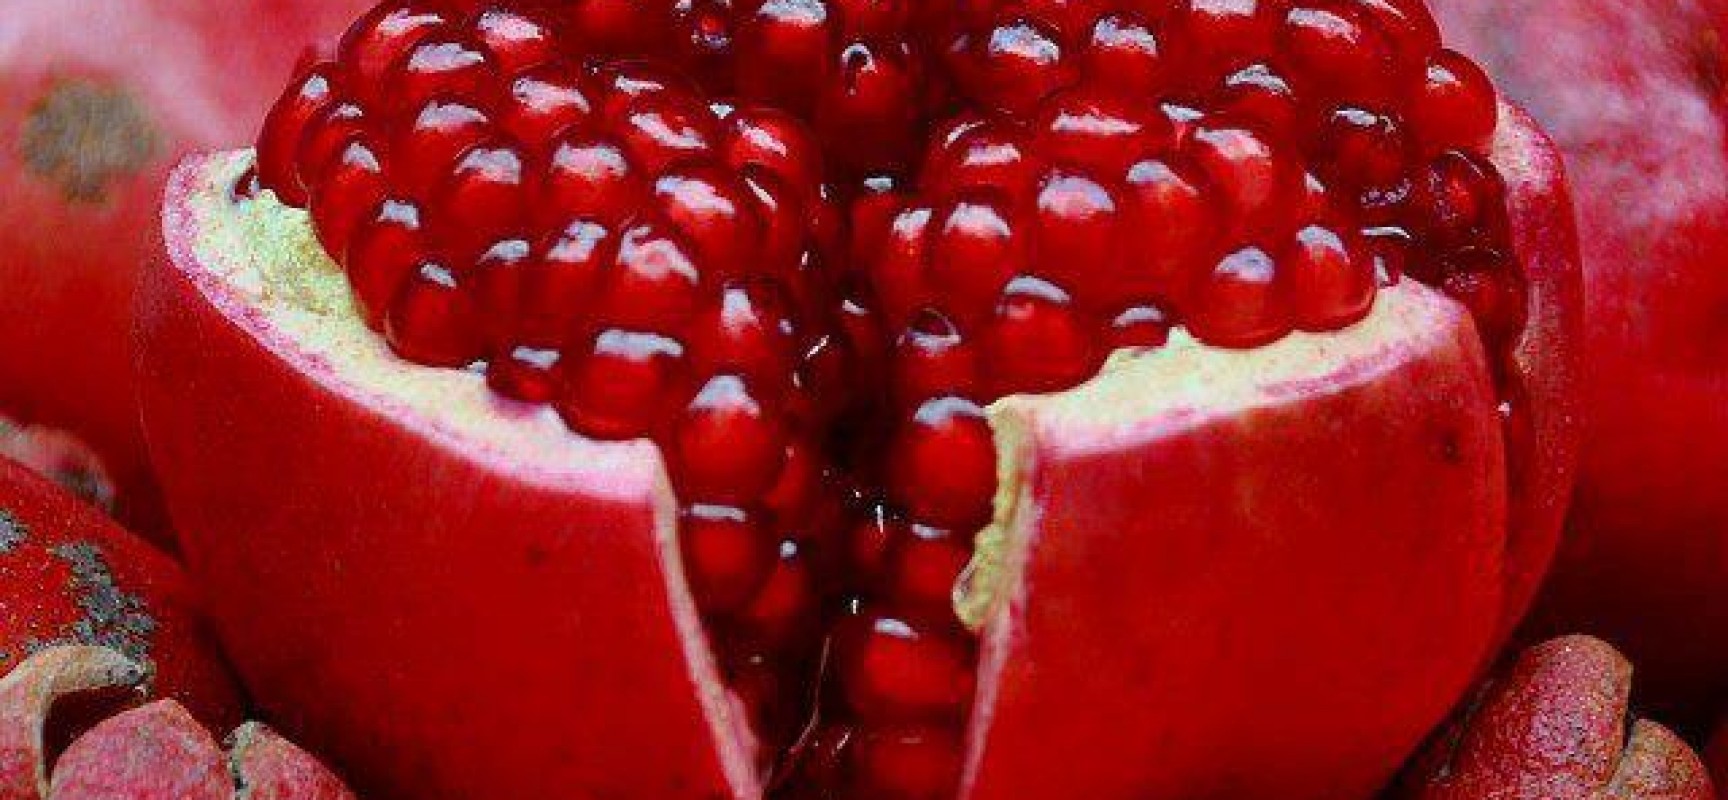 Benefits of Pomegranate juice for health